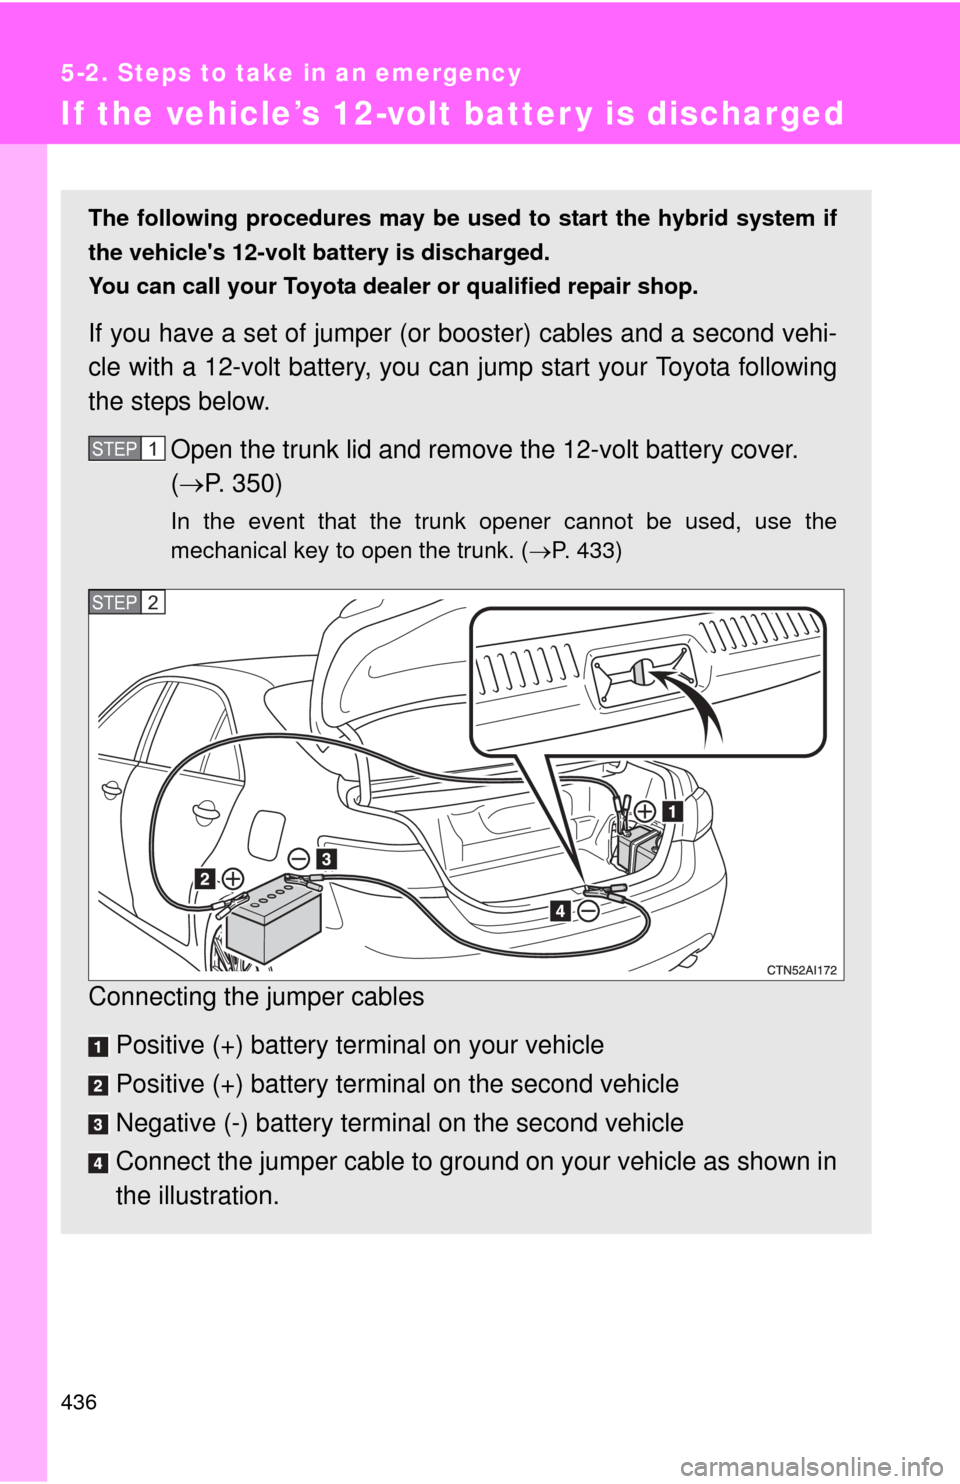 TOYOTA CAMRY HYBRID 2011 XV50 / 9.G Owners Manual 436
5-2. Steps to take in an emergency
If the vehicle’s 12-volt batter y is discharged
The following procedures may be used to start the hybrid system if
the vehicles 12-volt battery is discharged.